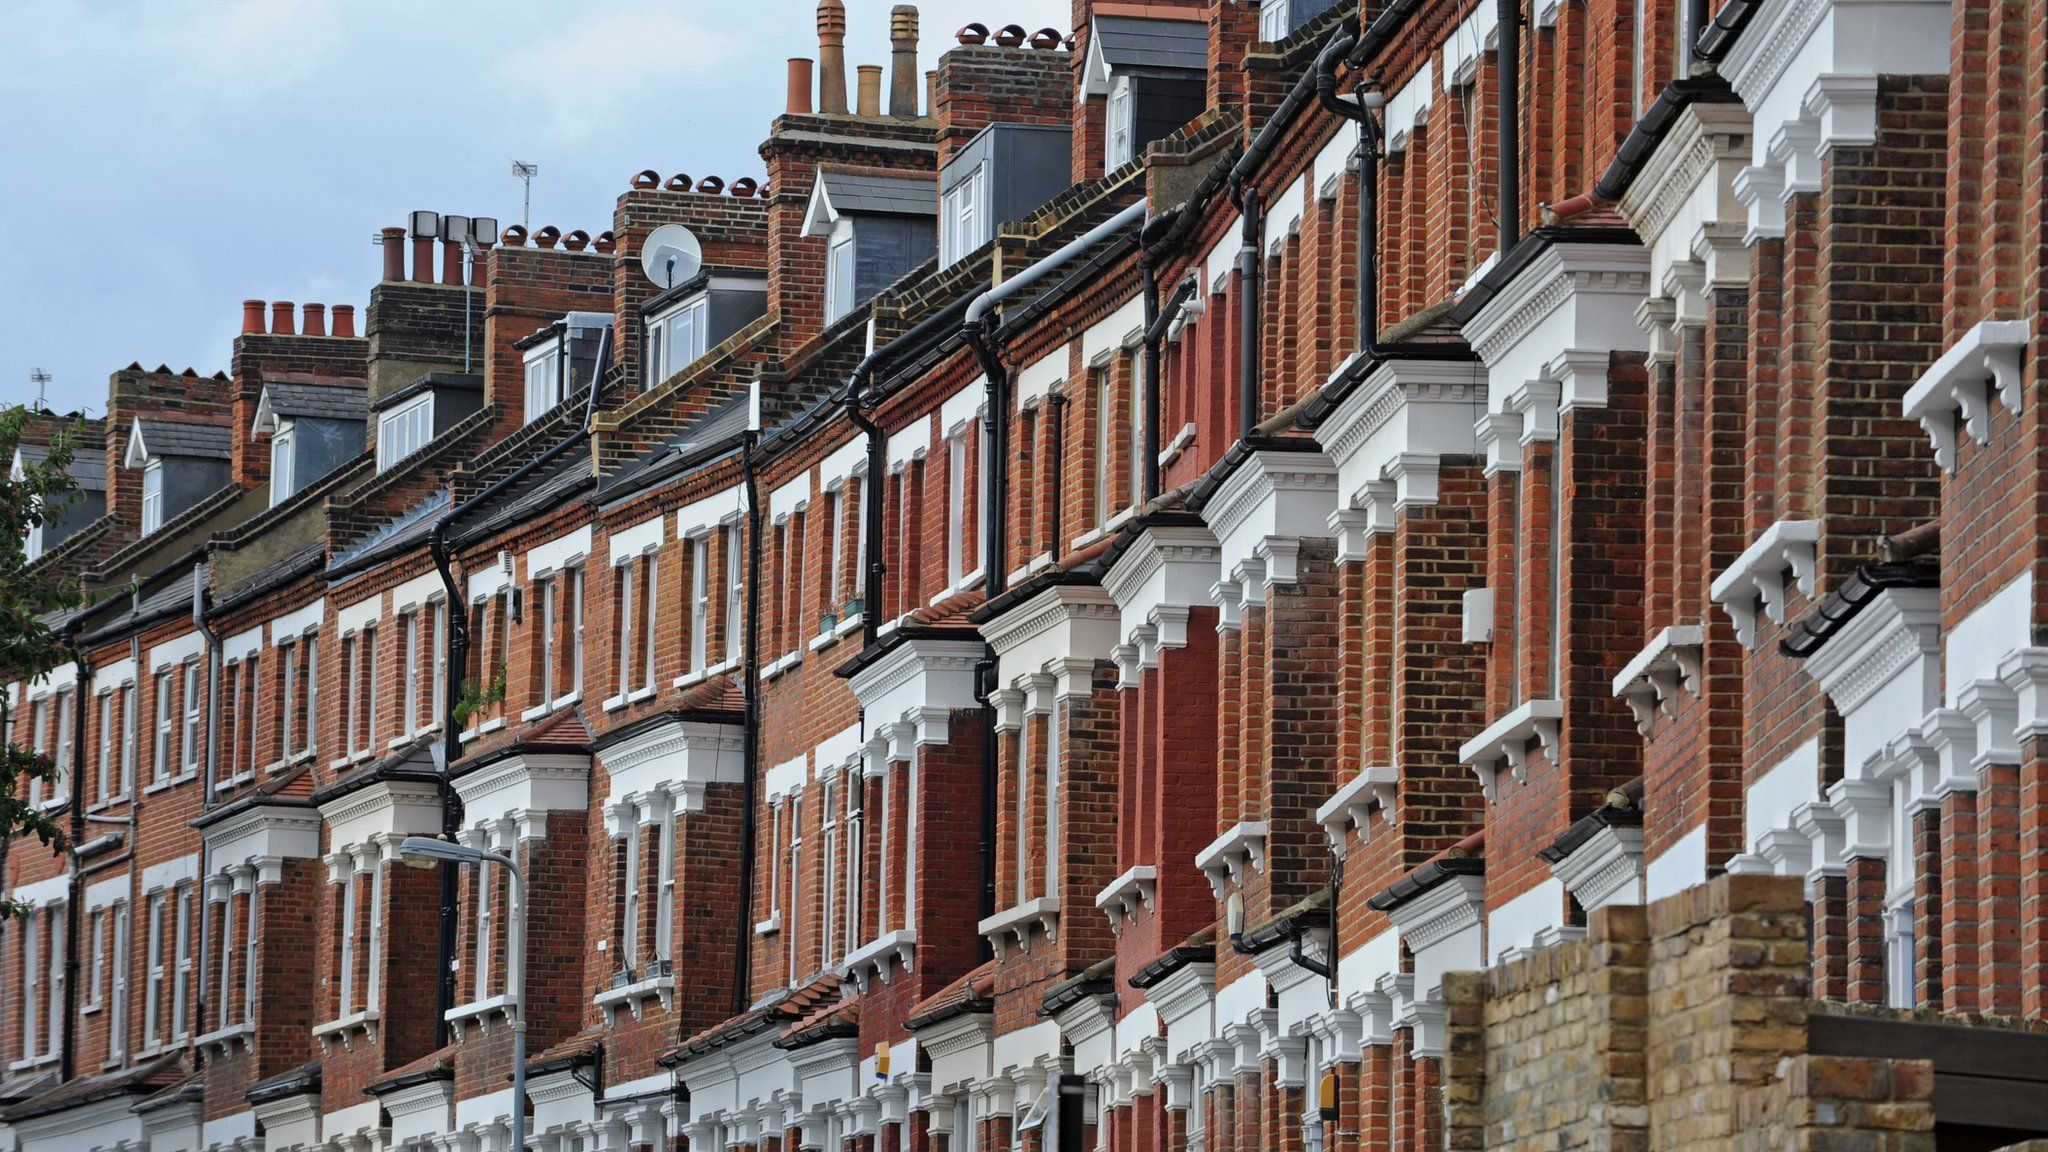 Row of houses in London